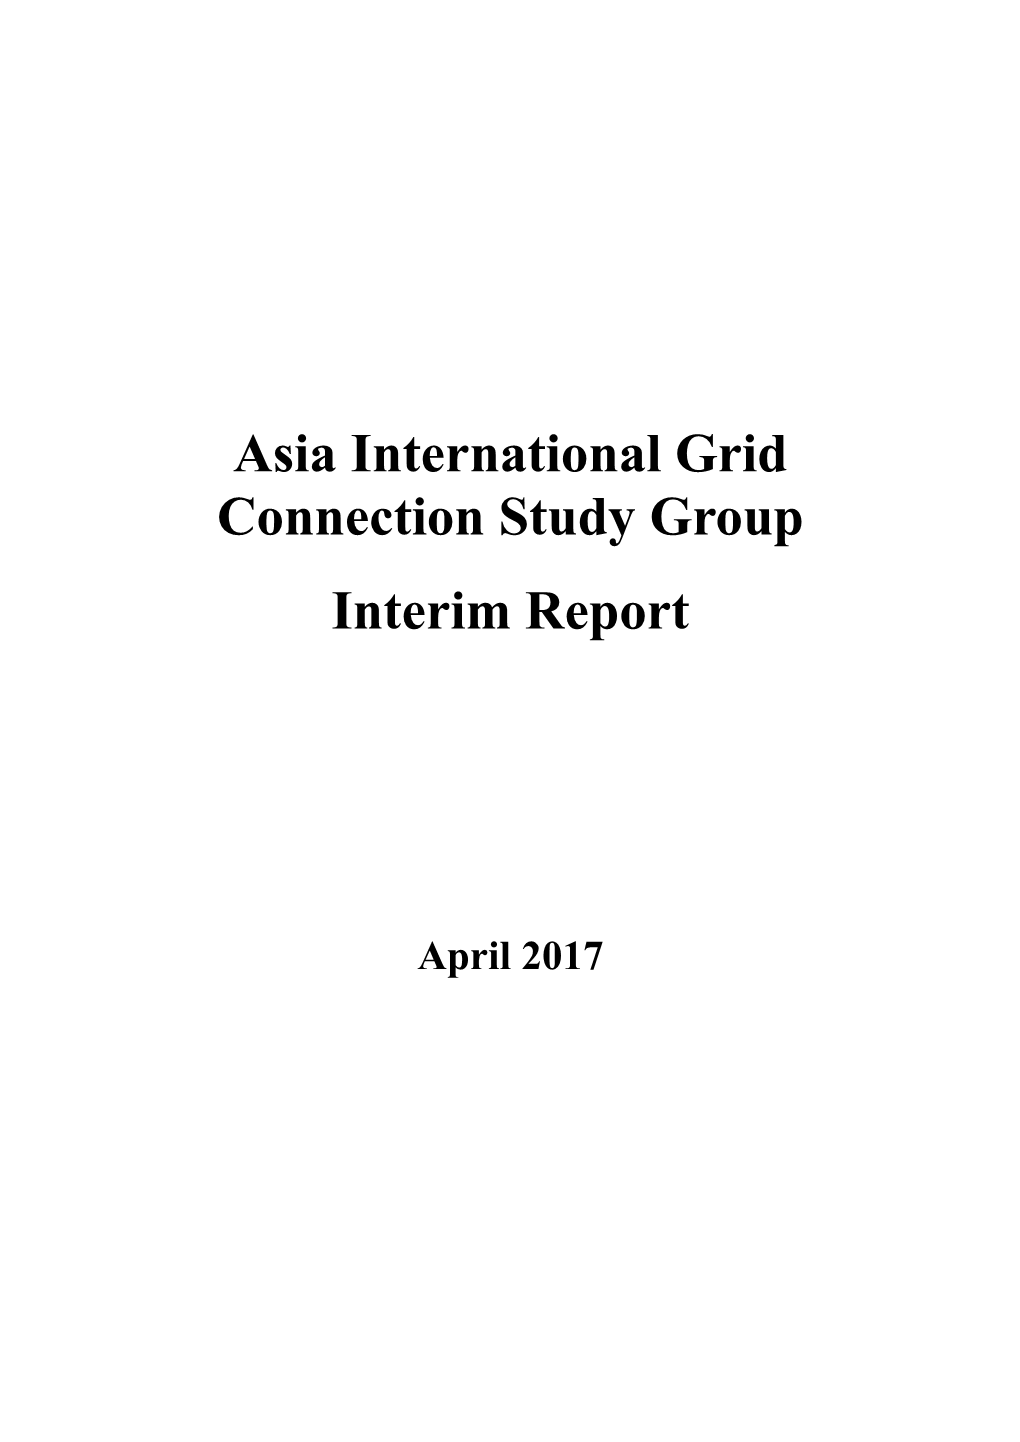 Asia International Grid Connection Study Group Interim Report